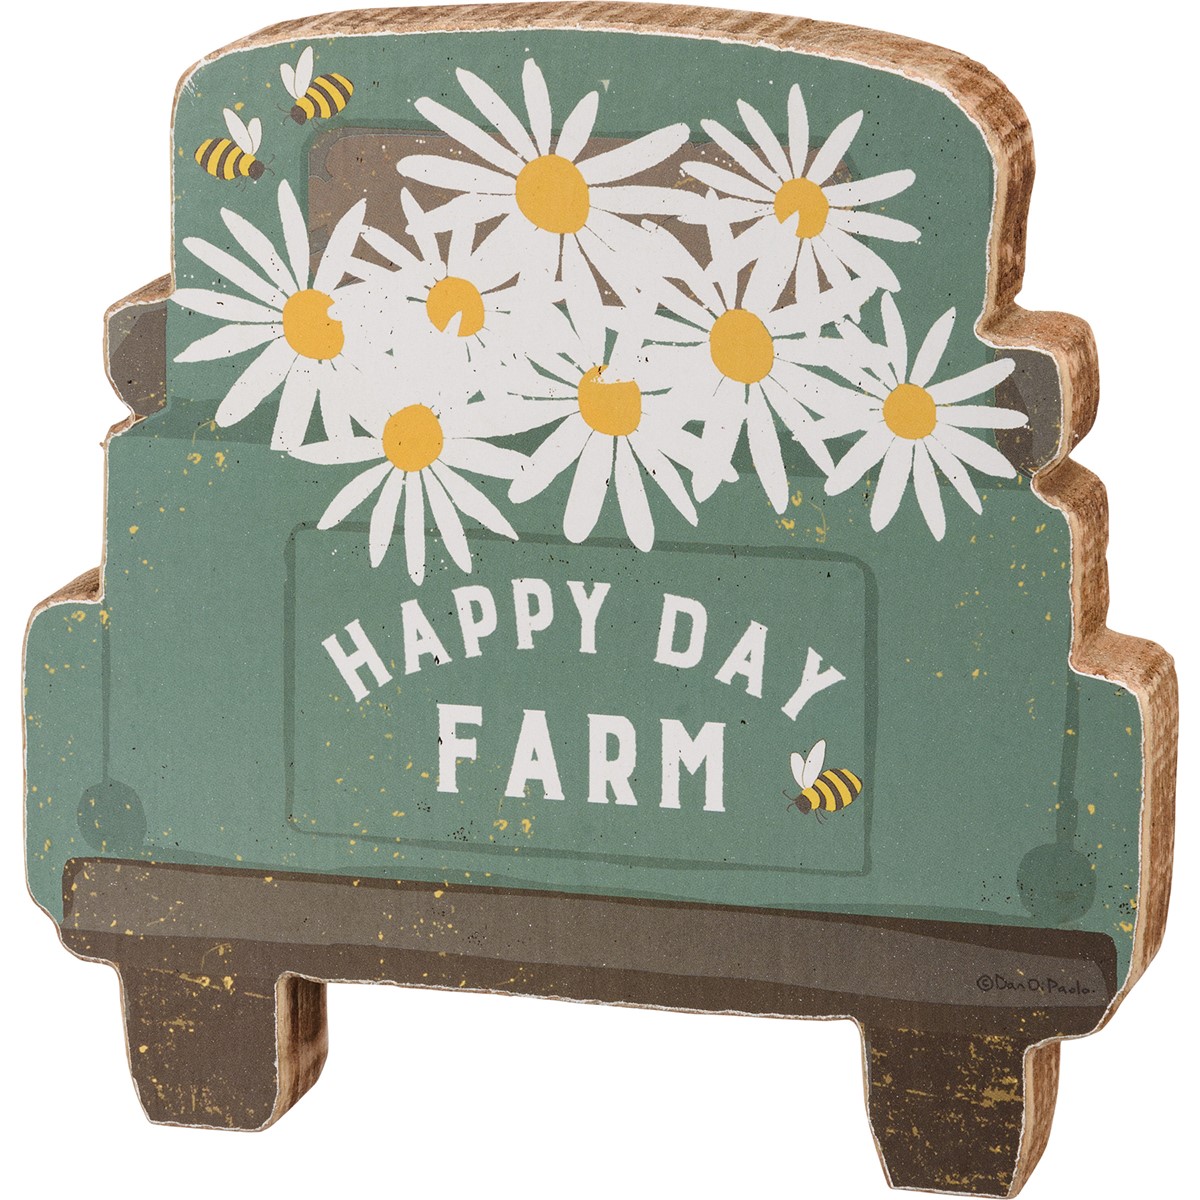 Happy Day Farm Chunky Sitter - Wood, Paper